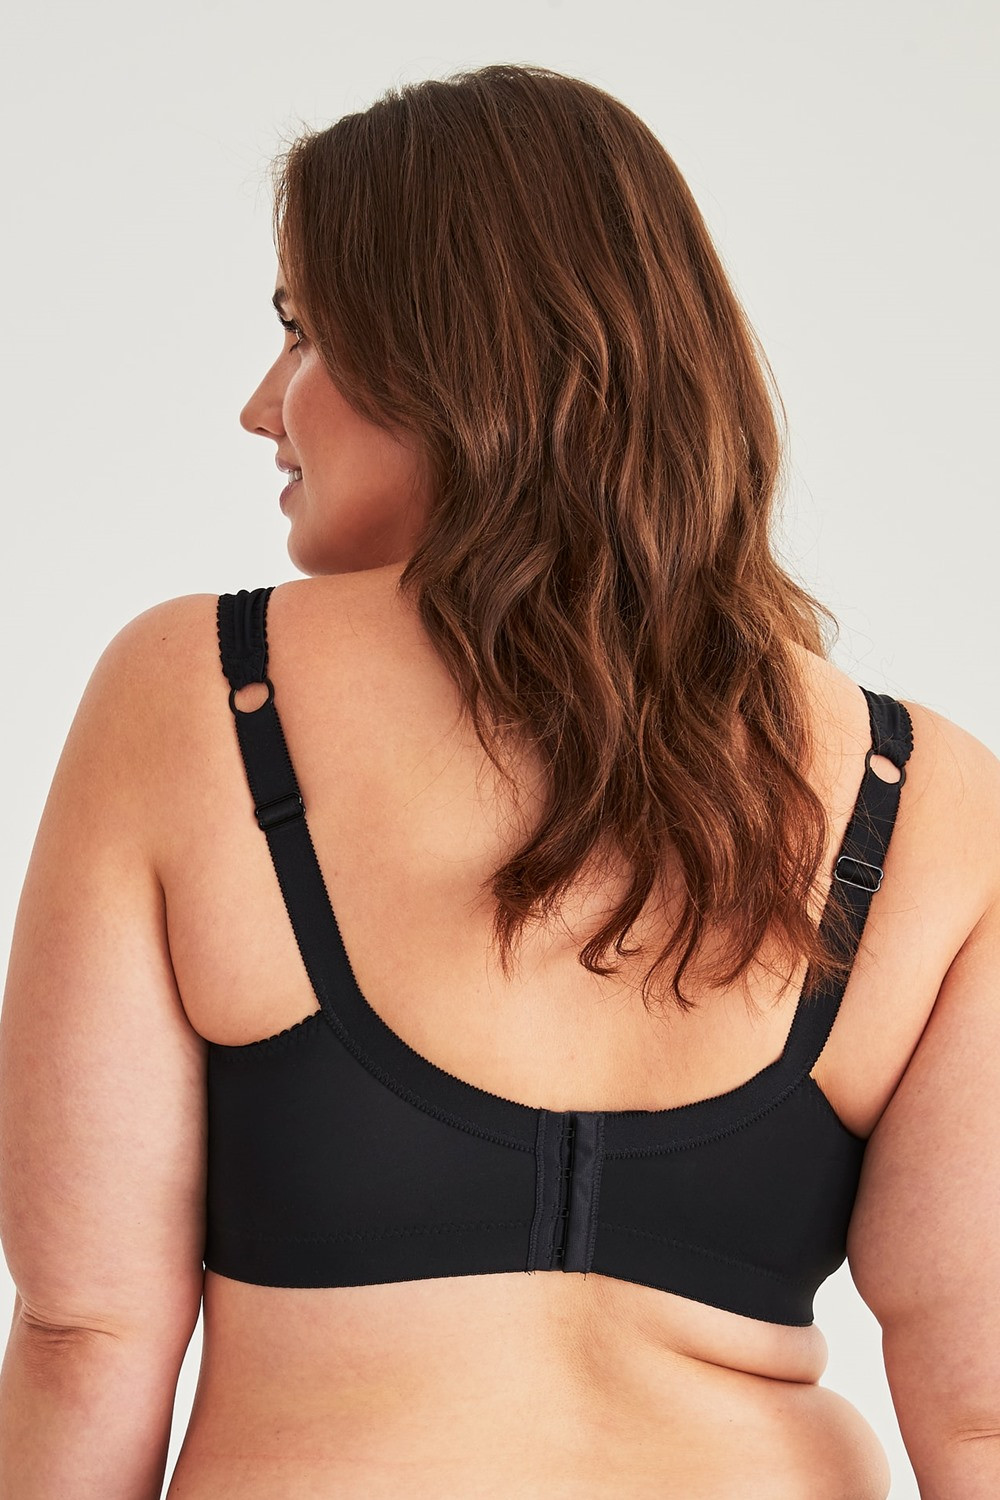 What is a mastectomy bra? – Meadow